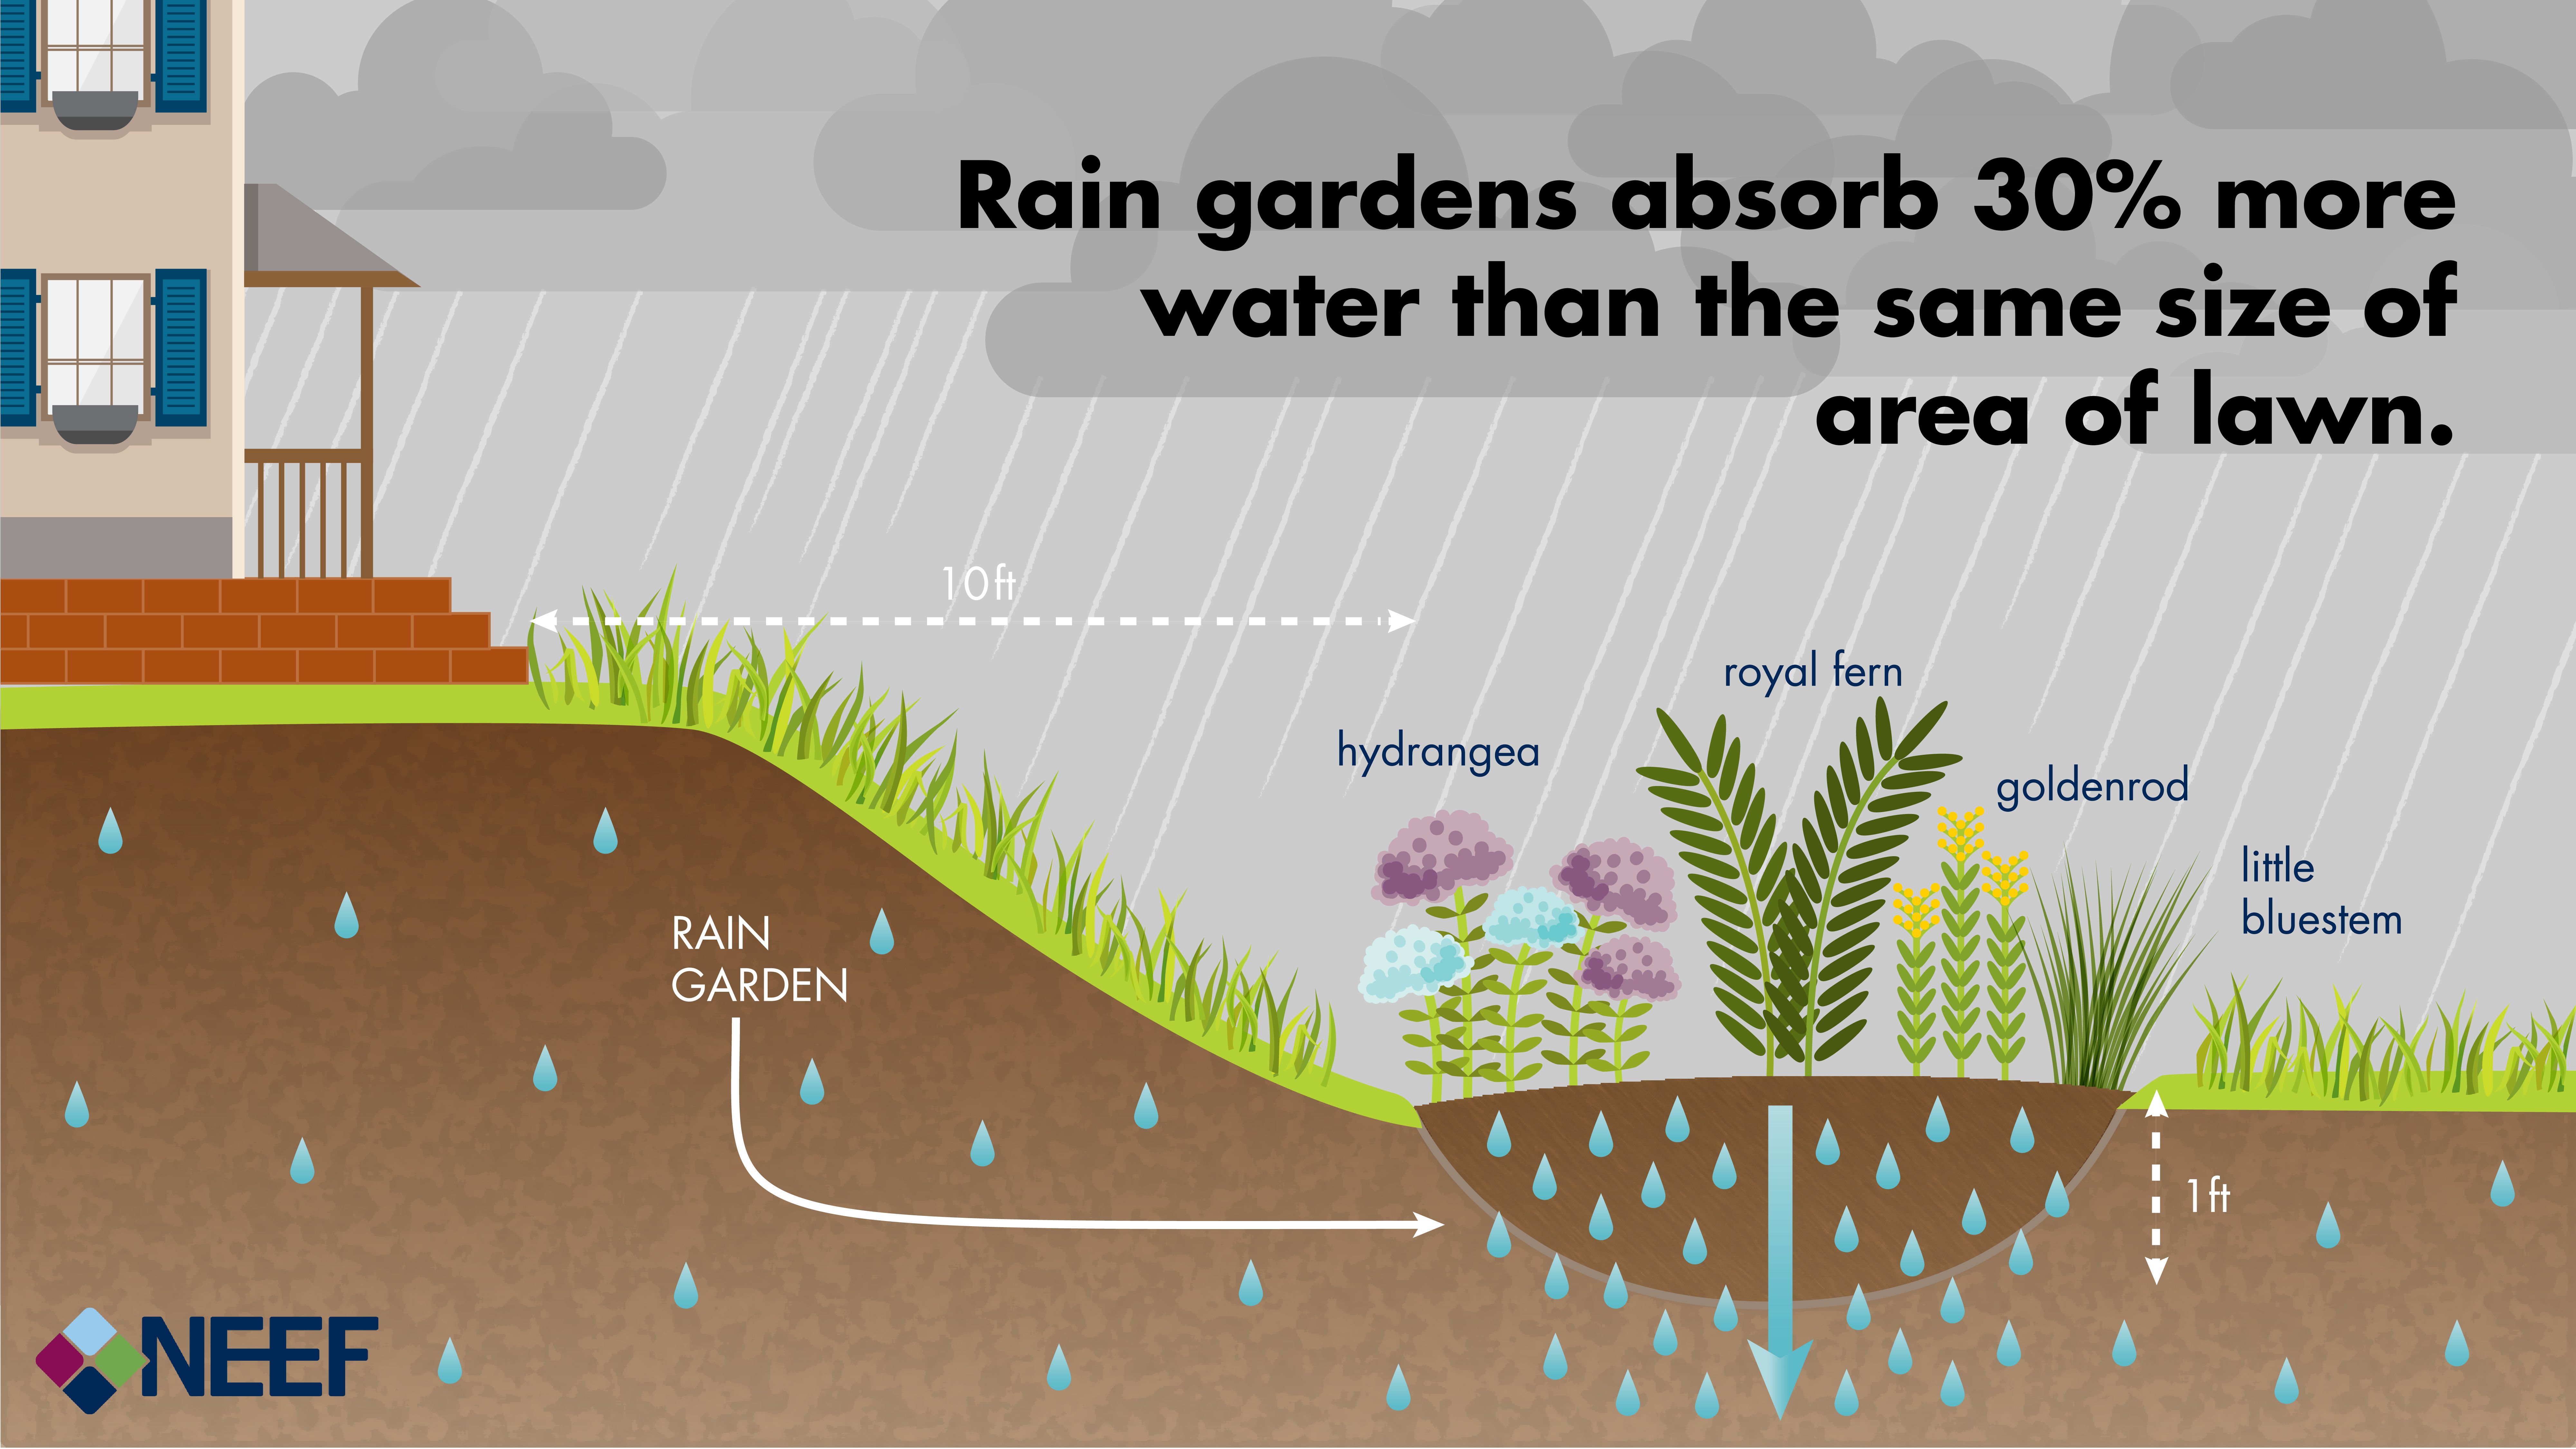 Rain gardens absorb 30% more water than the same size of area of lawn